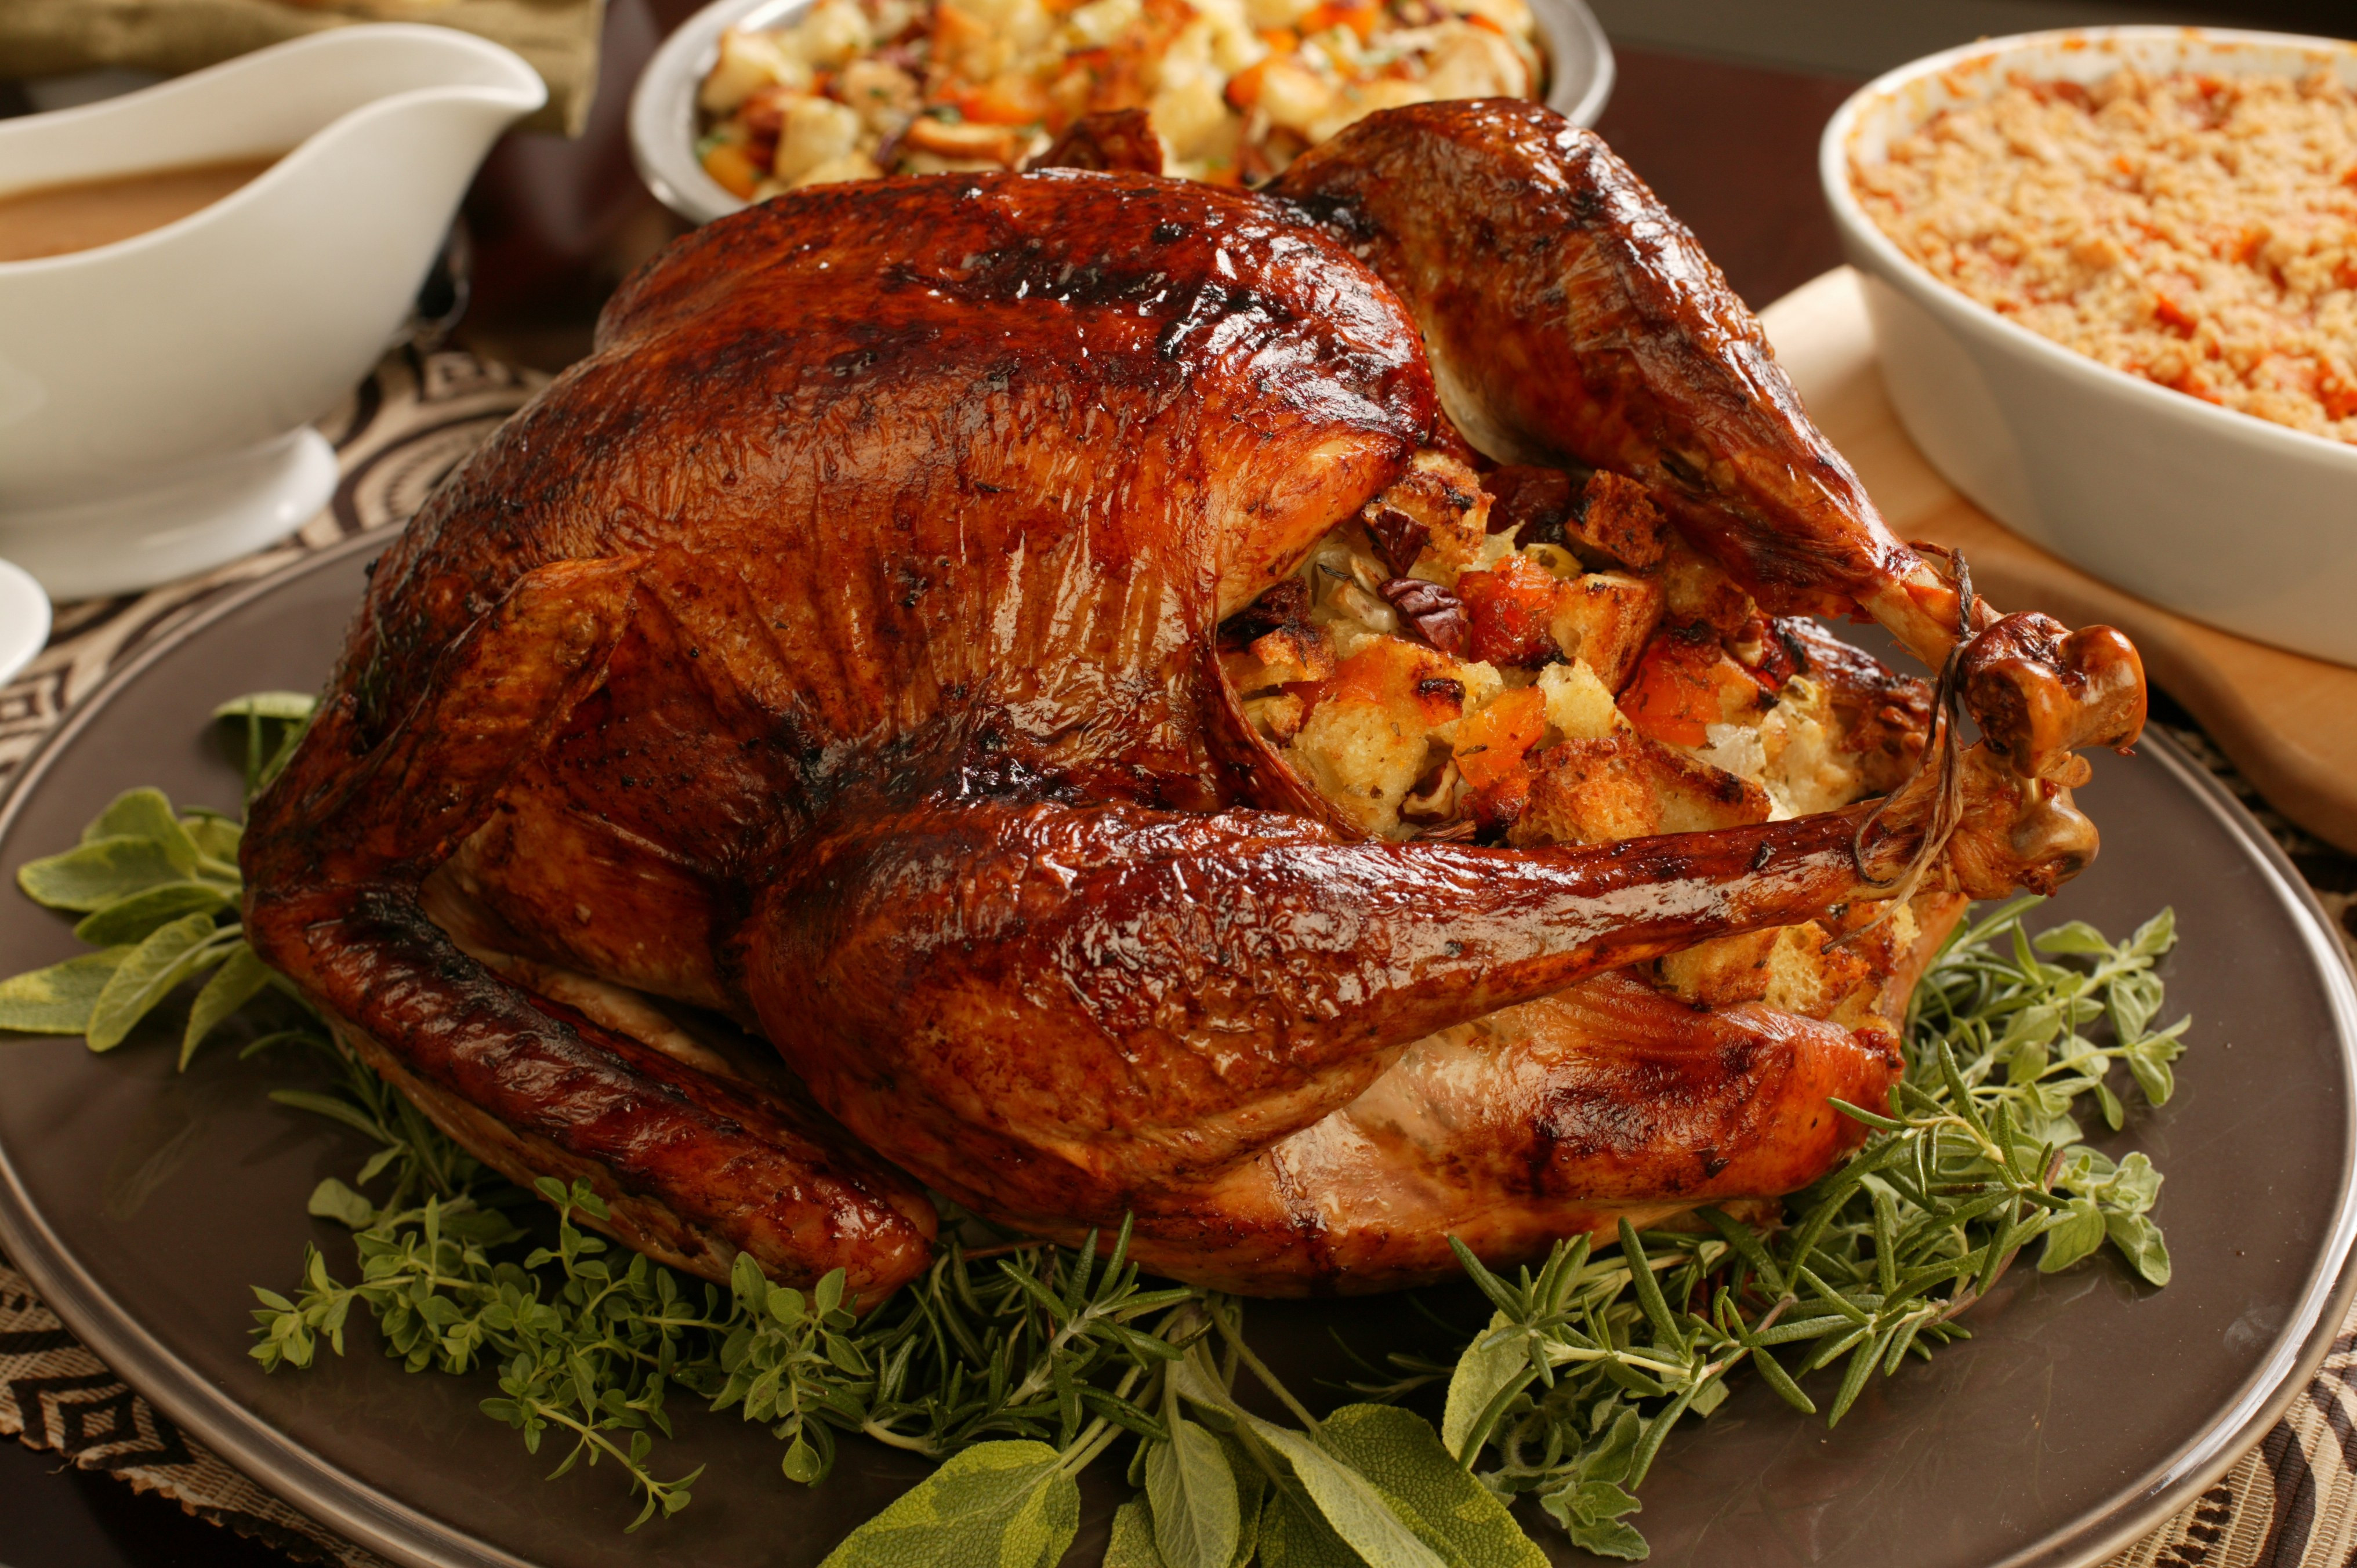 Bake Turkey Recipe For Thanksgiving
 Classic Roast Turkey With Herbed Stuffing and Old